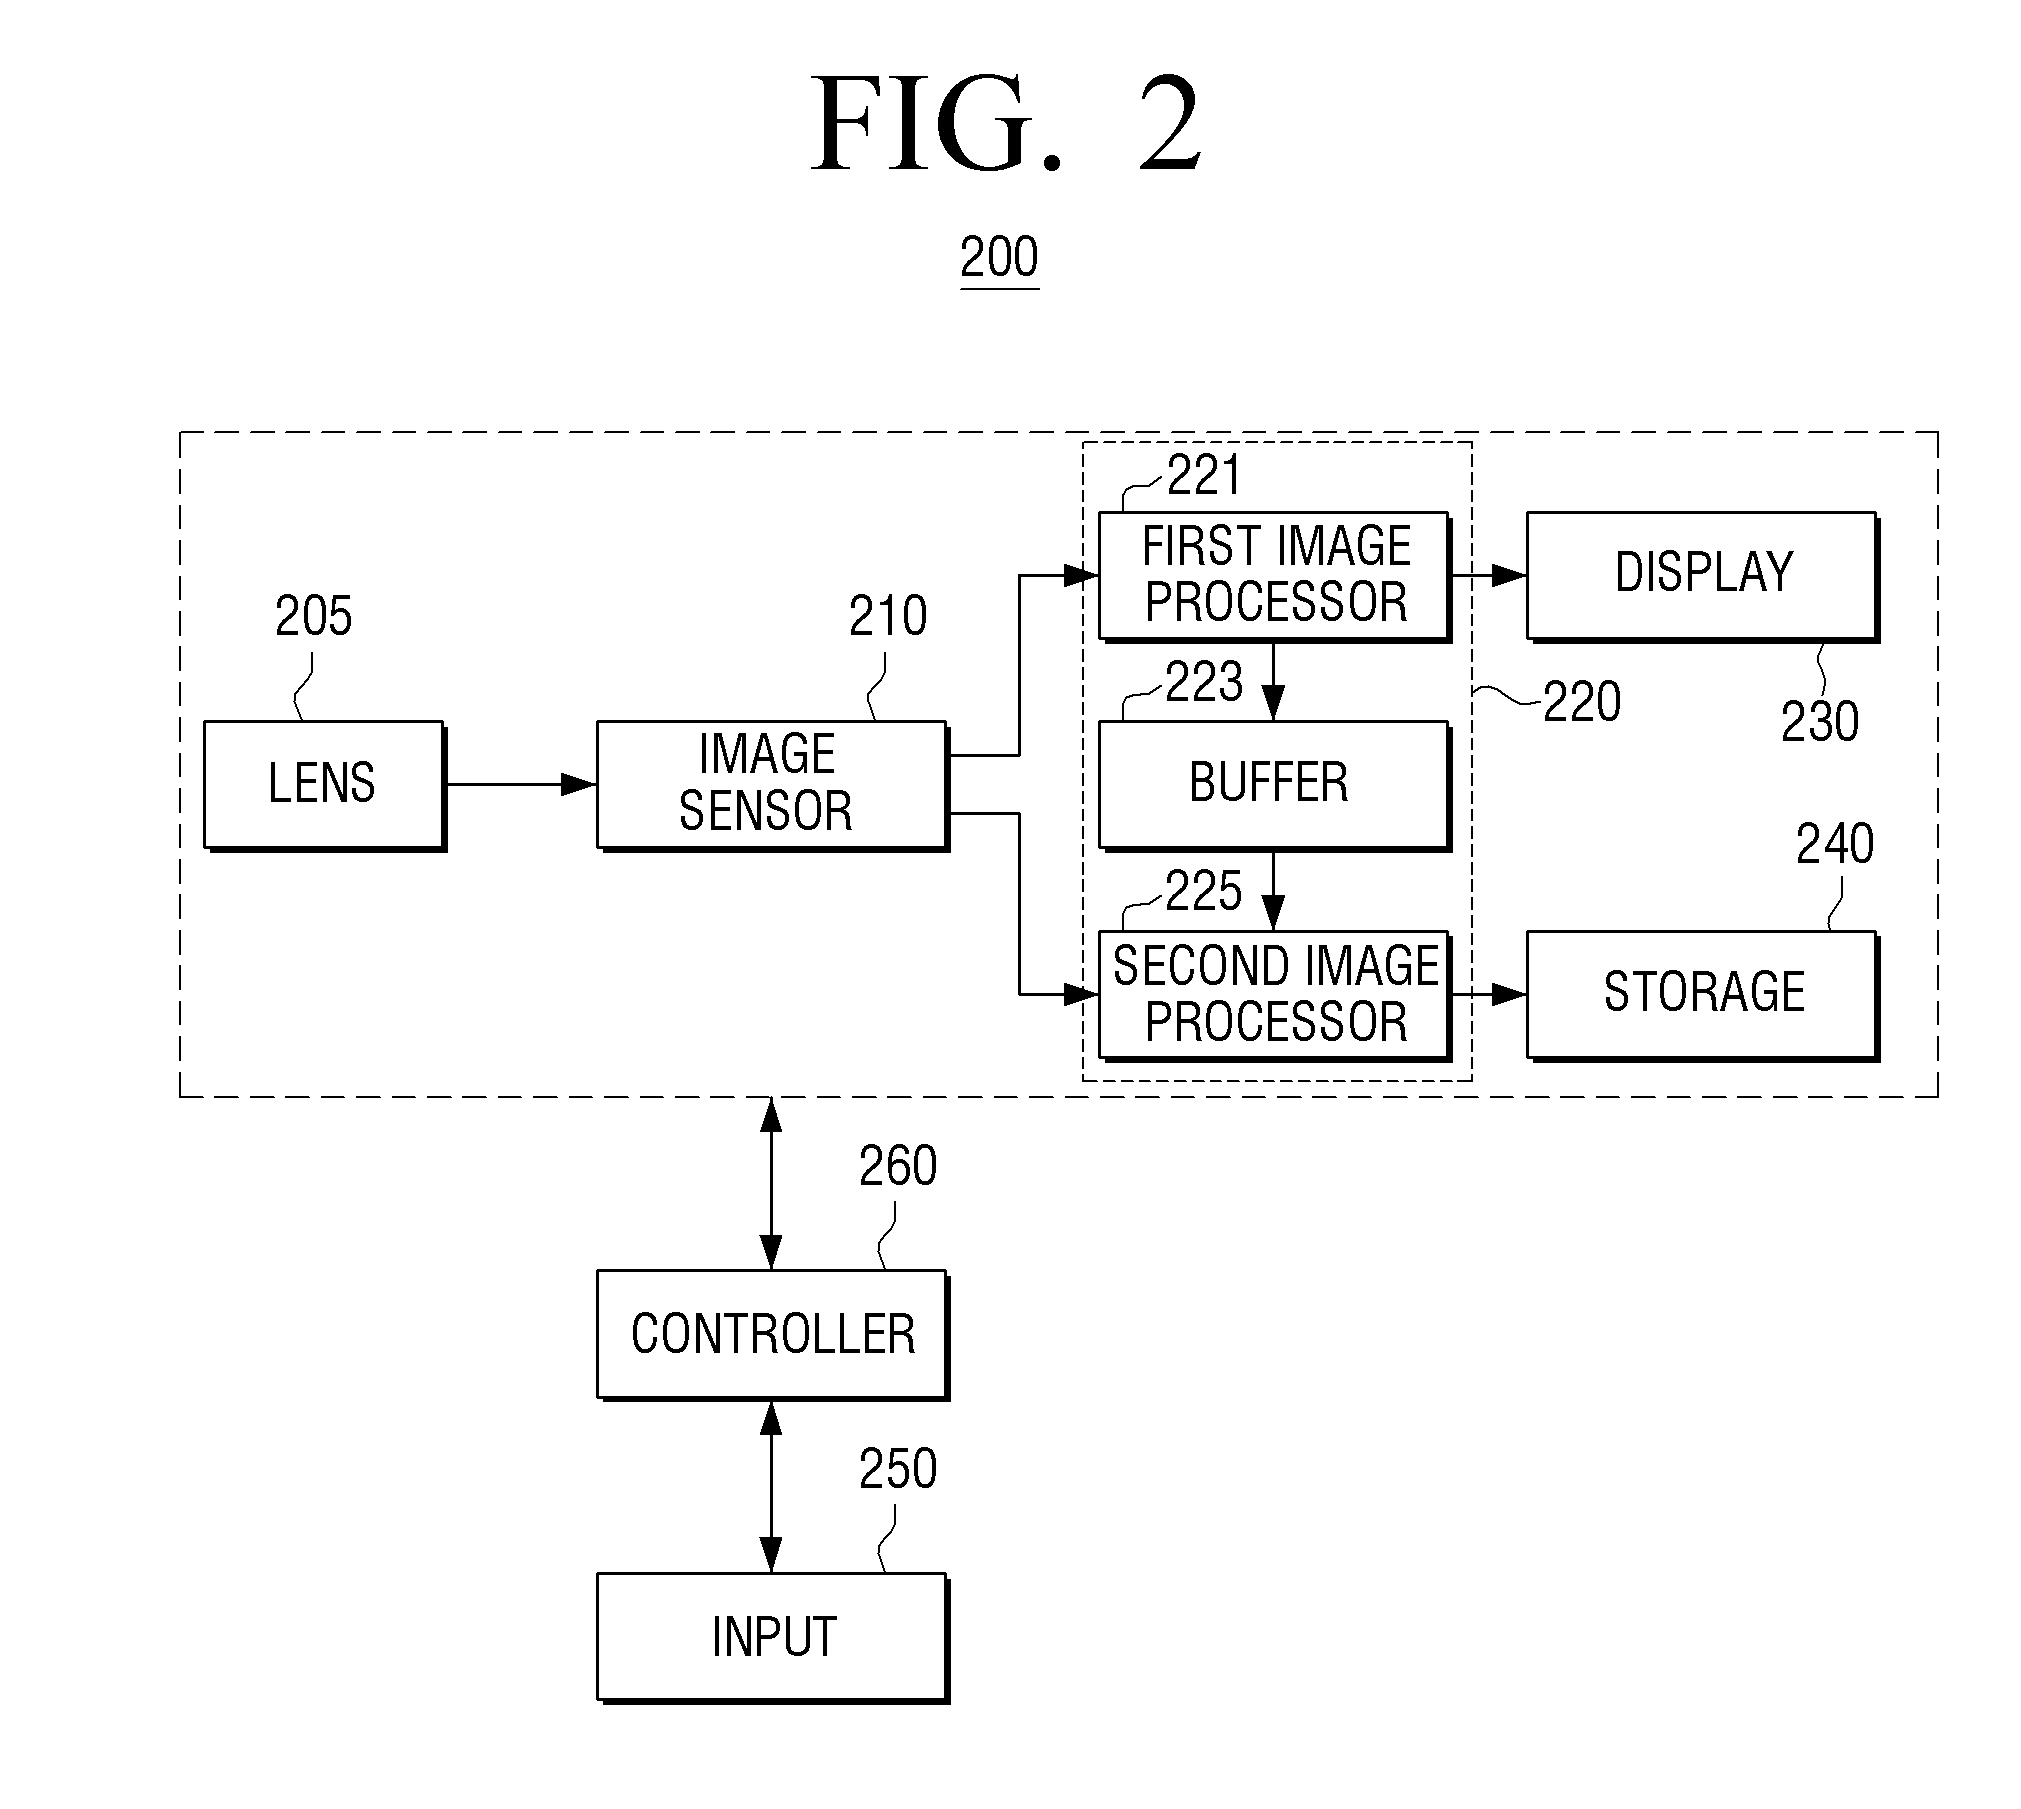 Apparatus and method to photograph an image